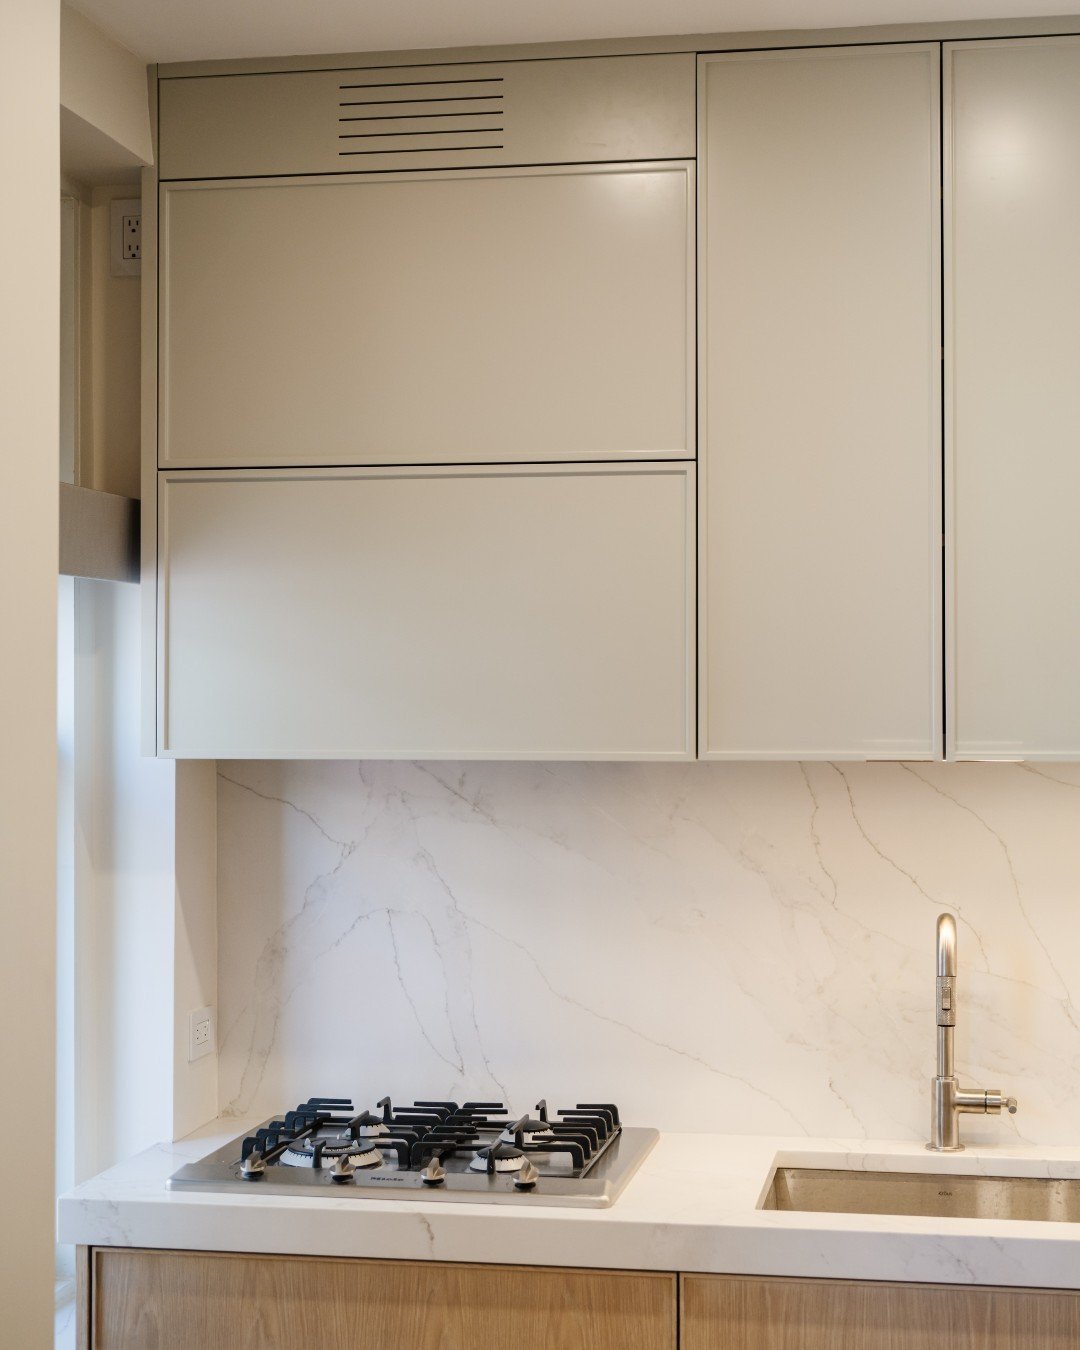 Living in NYC your options are often limited when it comes to kitchen ventilation. However, we've come up with a clever solution to maximize the efficiency of recirculating hood vents!

By installing a recirculating hood vent above the cooktop and co